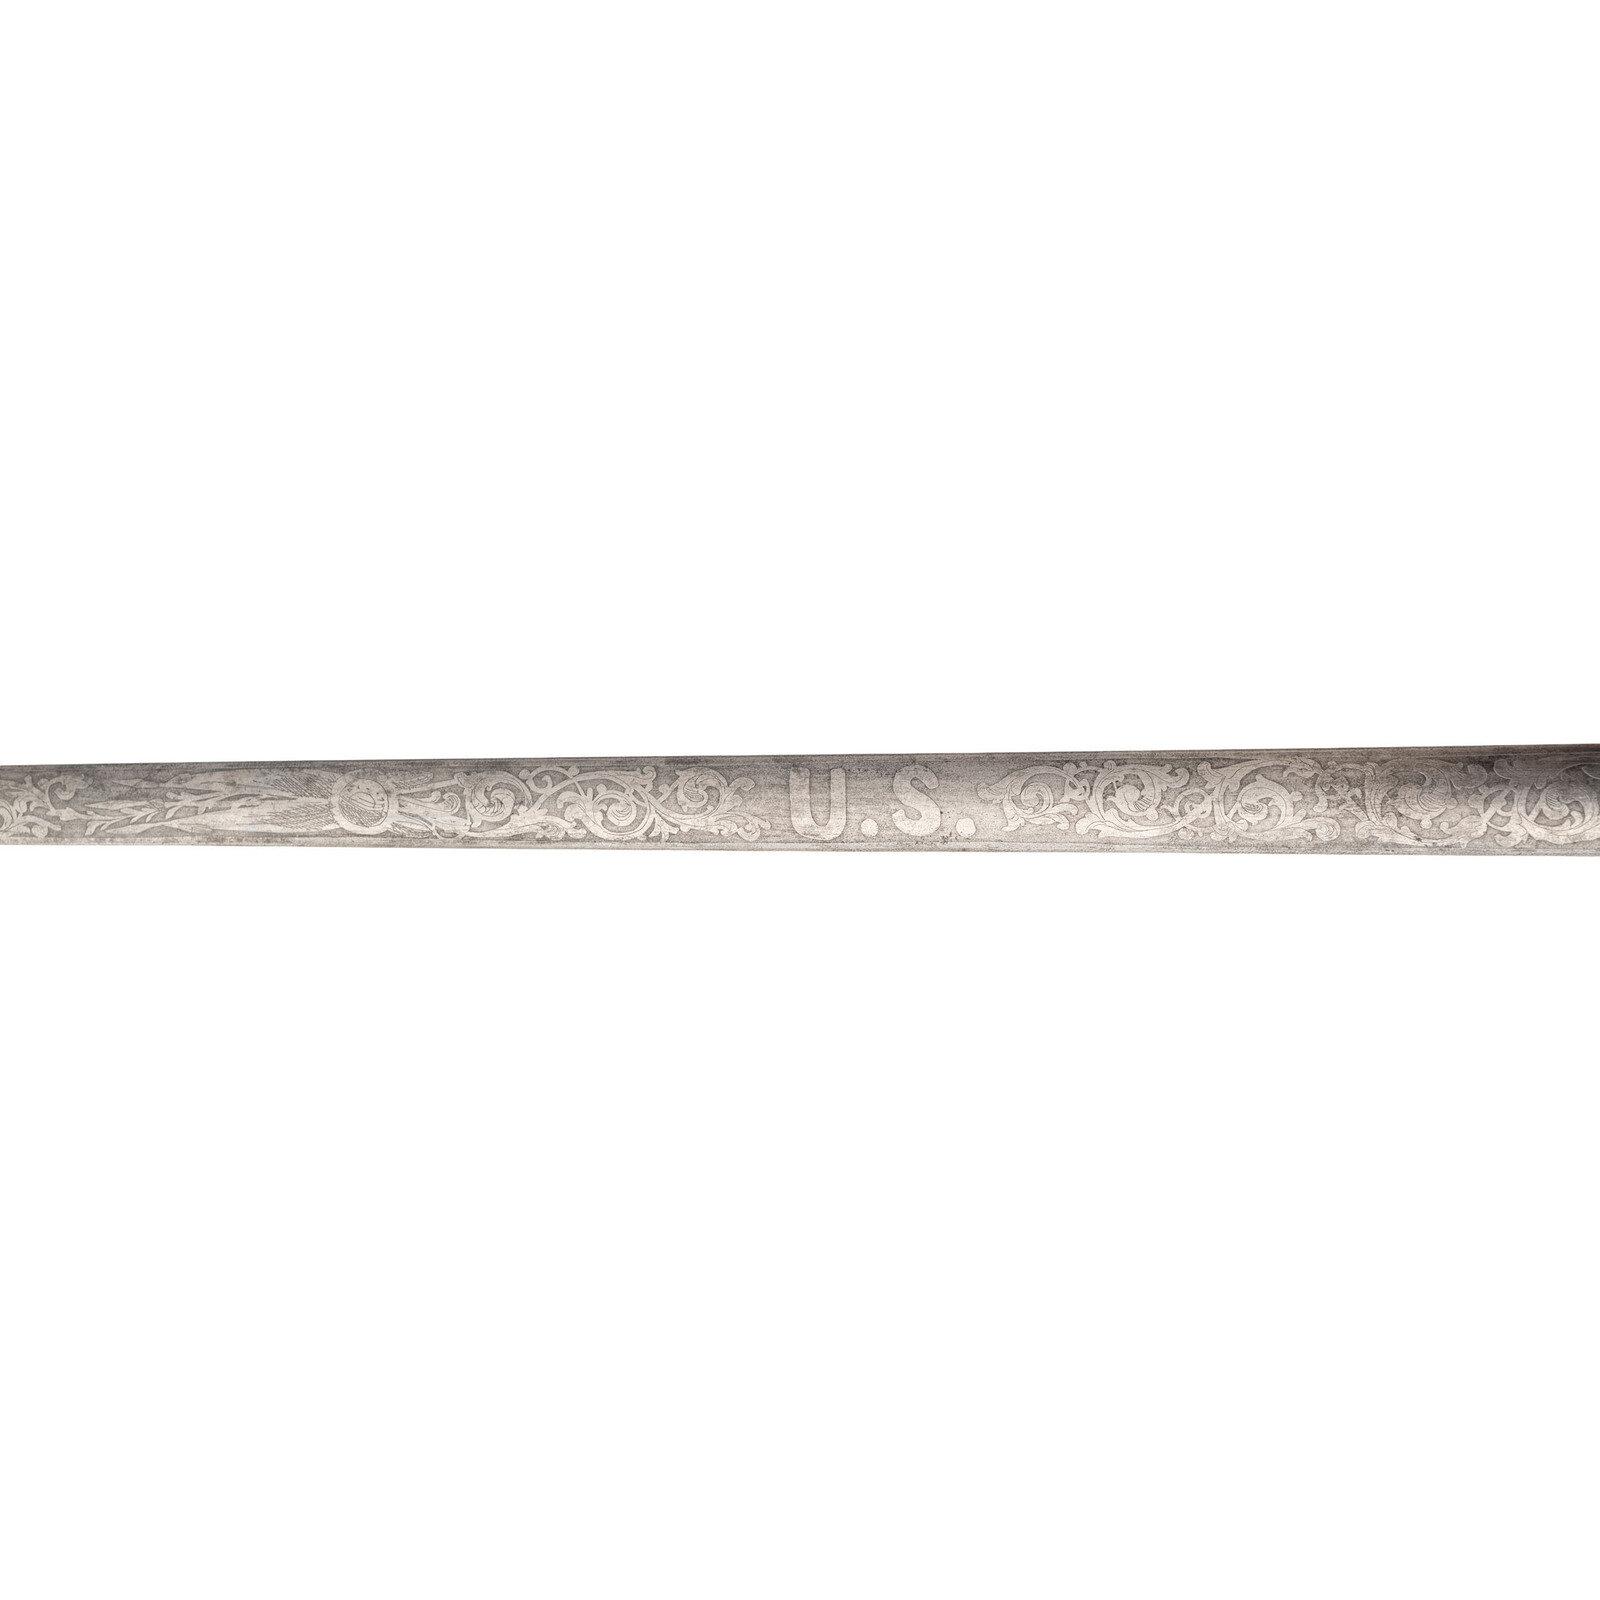 US Model 1840 Medical Staff Sword Engraved to Assistant Surgeon Benjamin Taft - 20th Mass Infantry